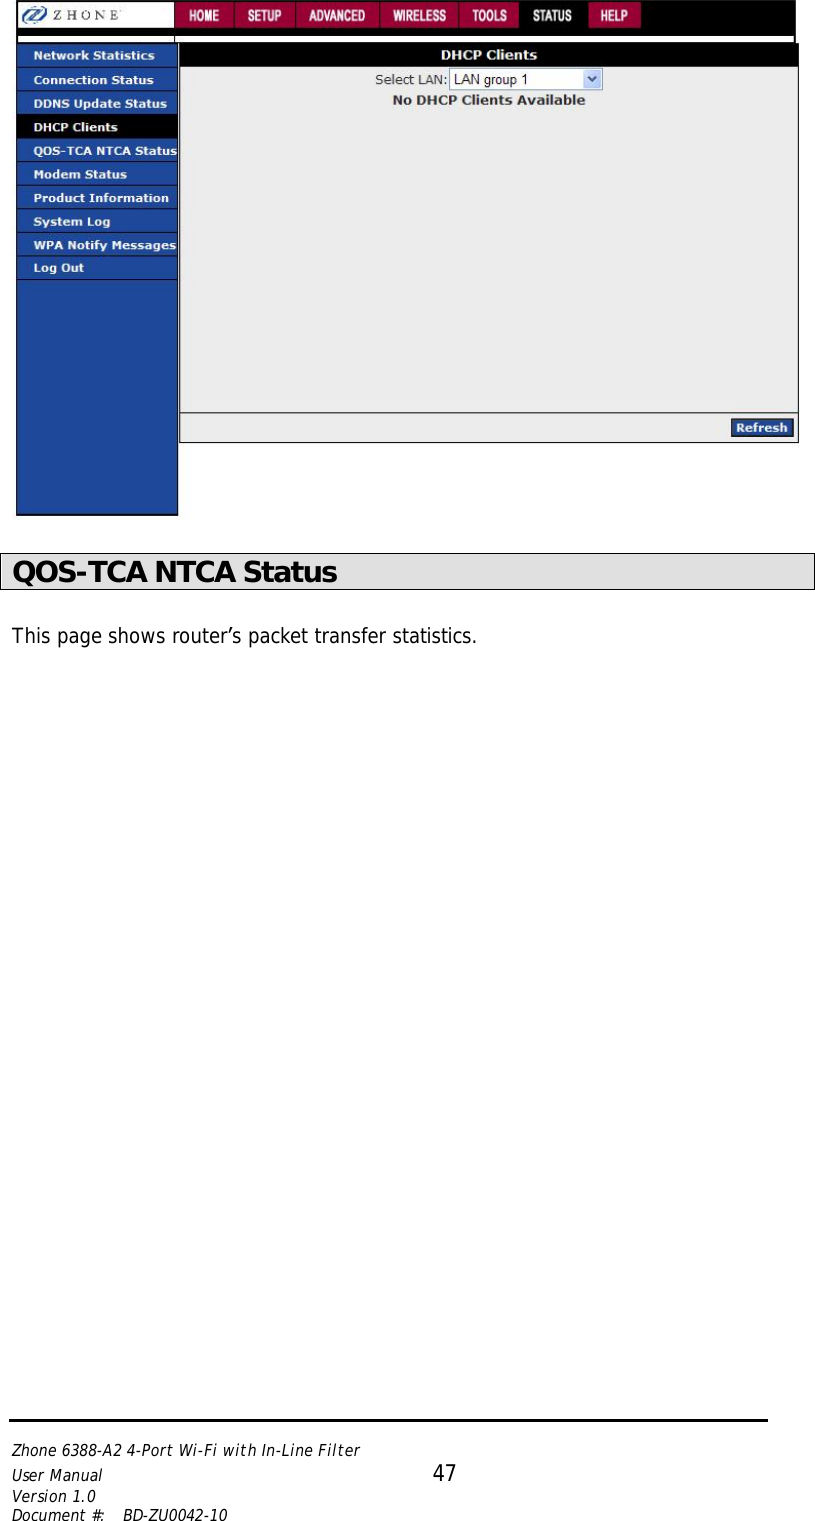   Zhone 6388-A2 4-Port Wi-Fi with In-Line Filter User Manual 47 Version 1.0 Document #:  BD-ZU0042-10     QOS-TCA NTCA Status  This page shows router’s packet transfer statistics. 